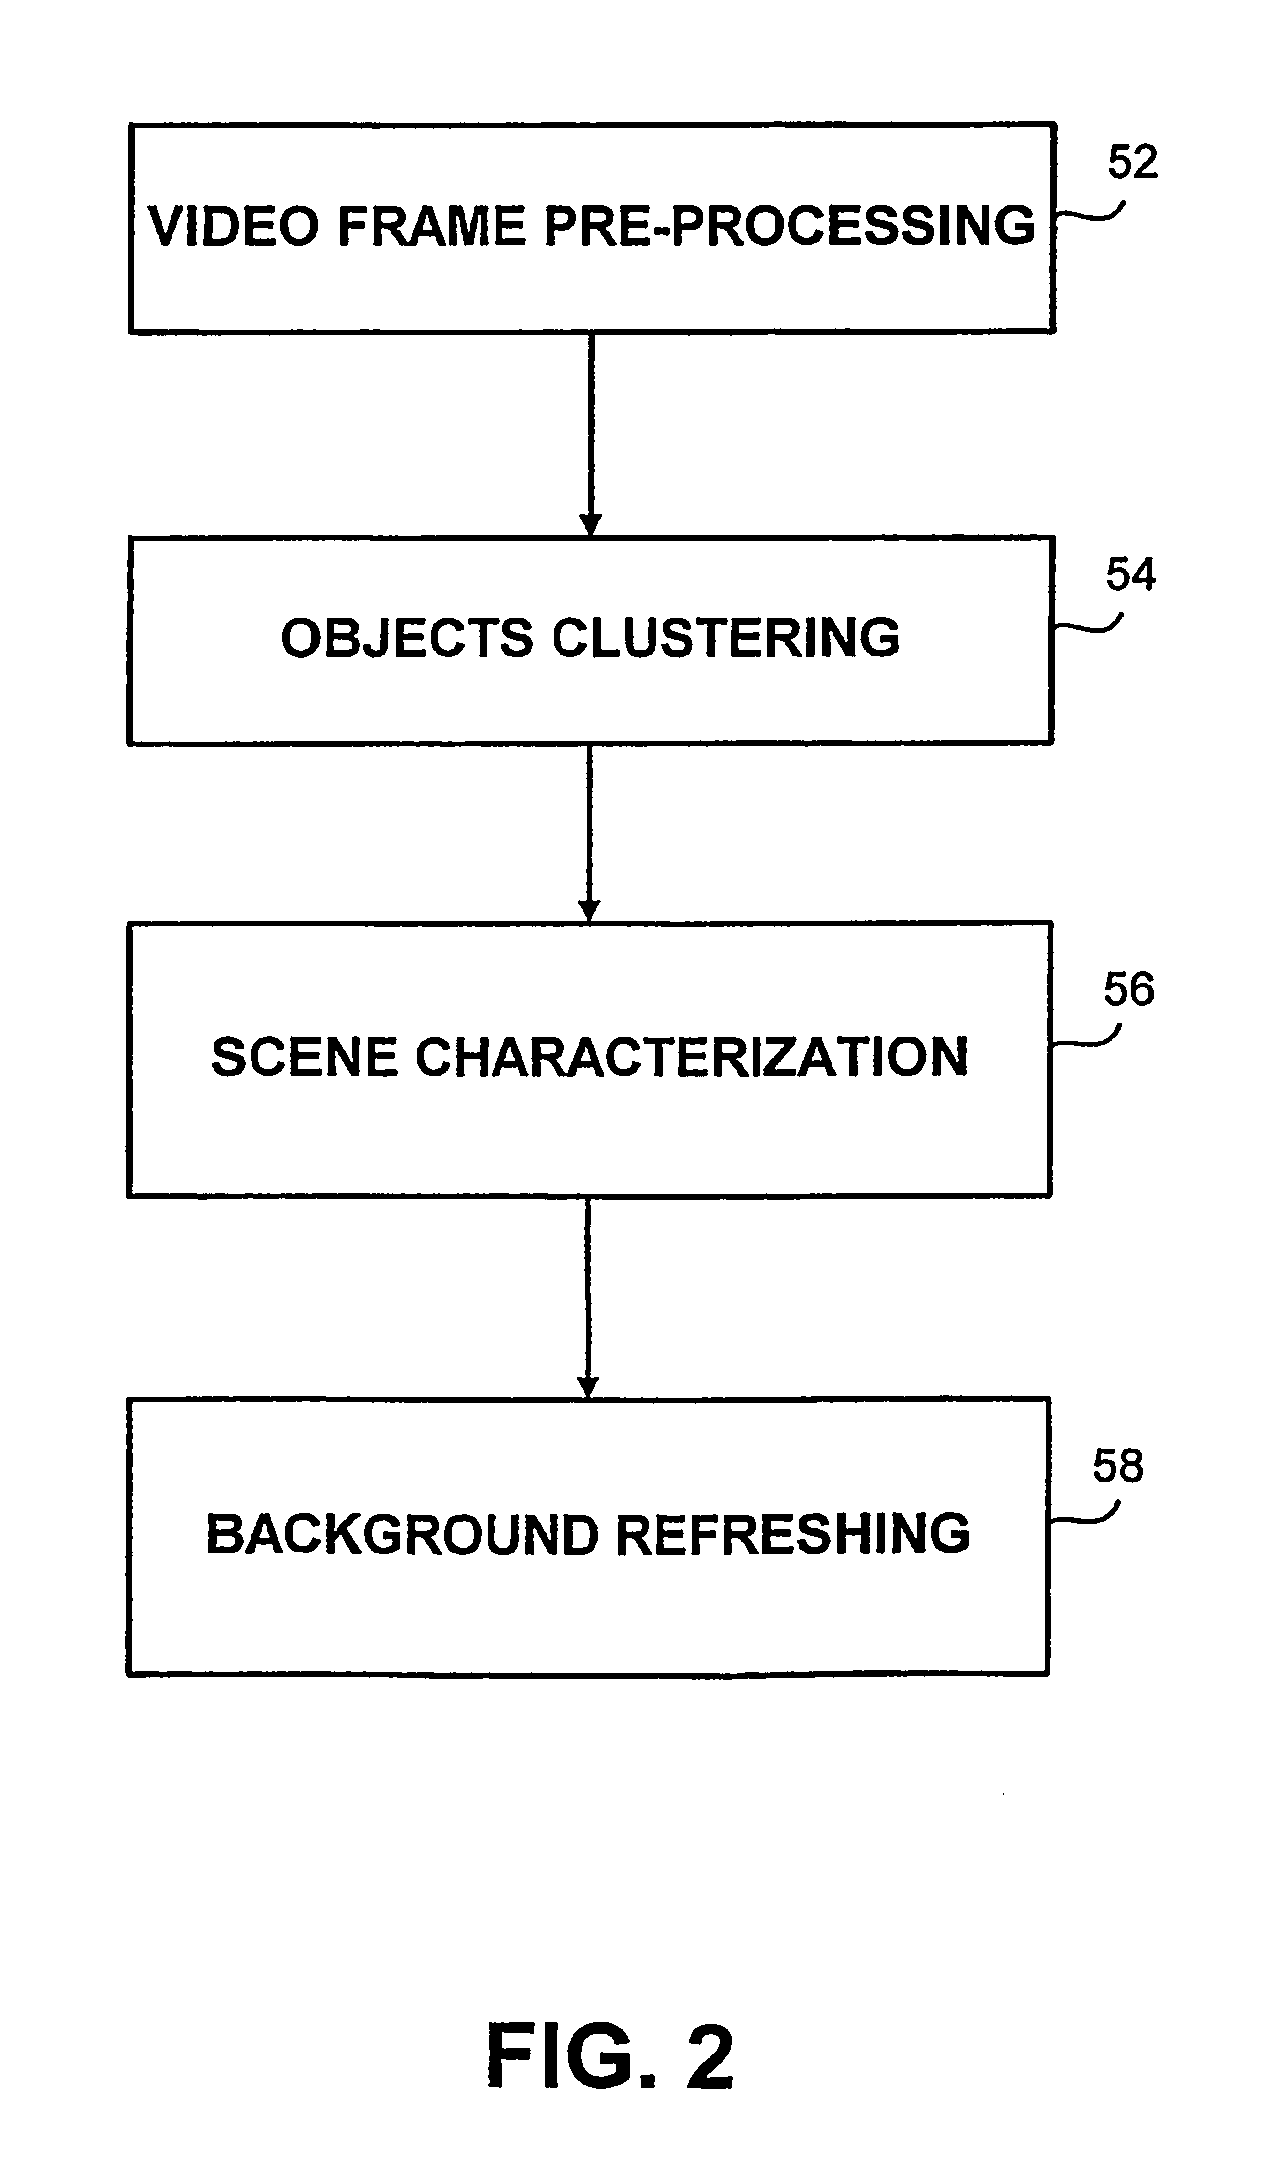 System and method for video content analysis-based detection, surveillance and alarm management